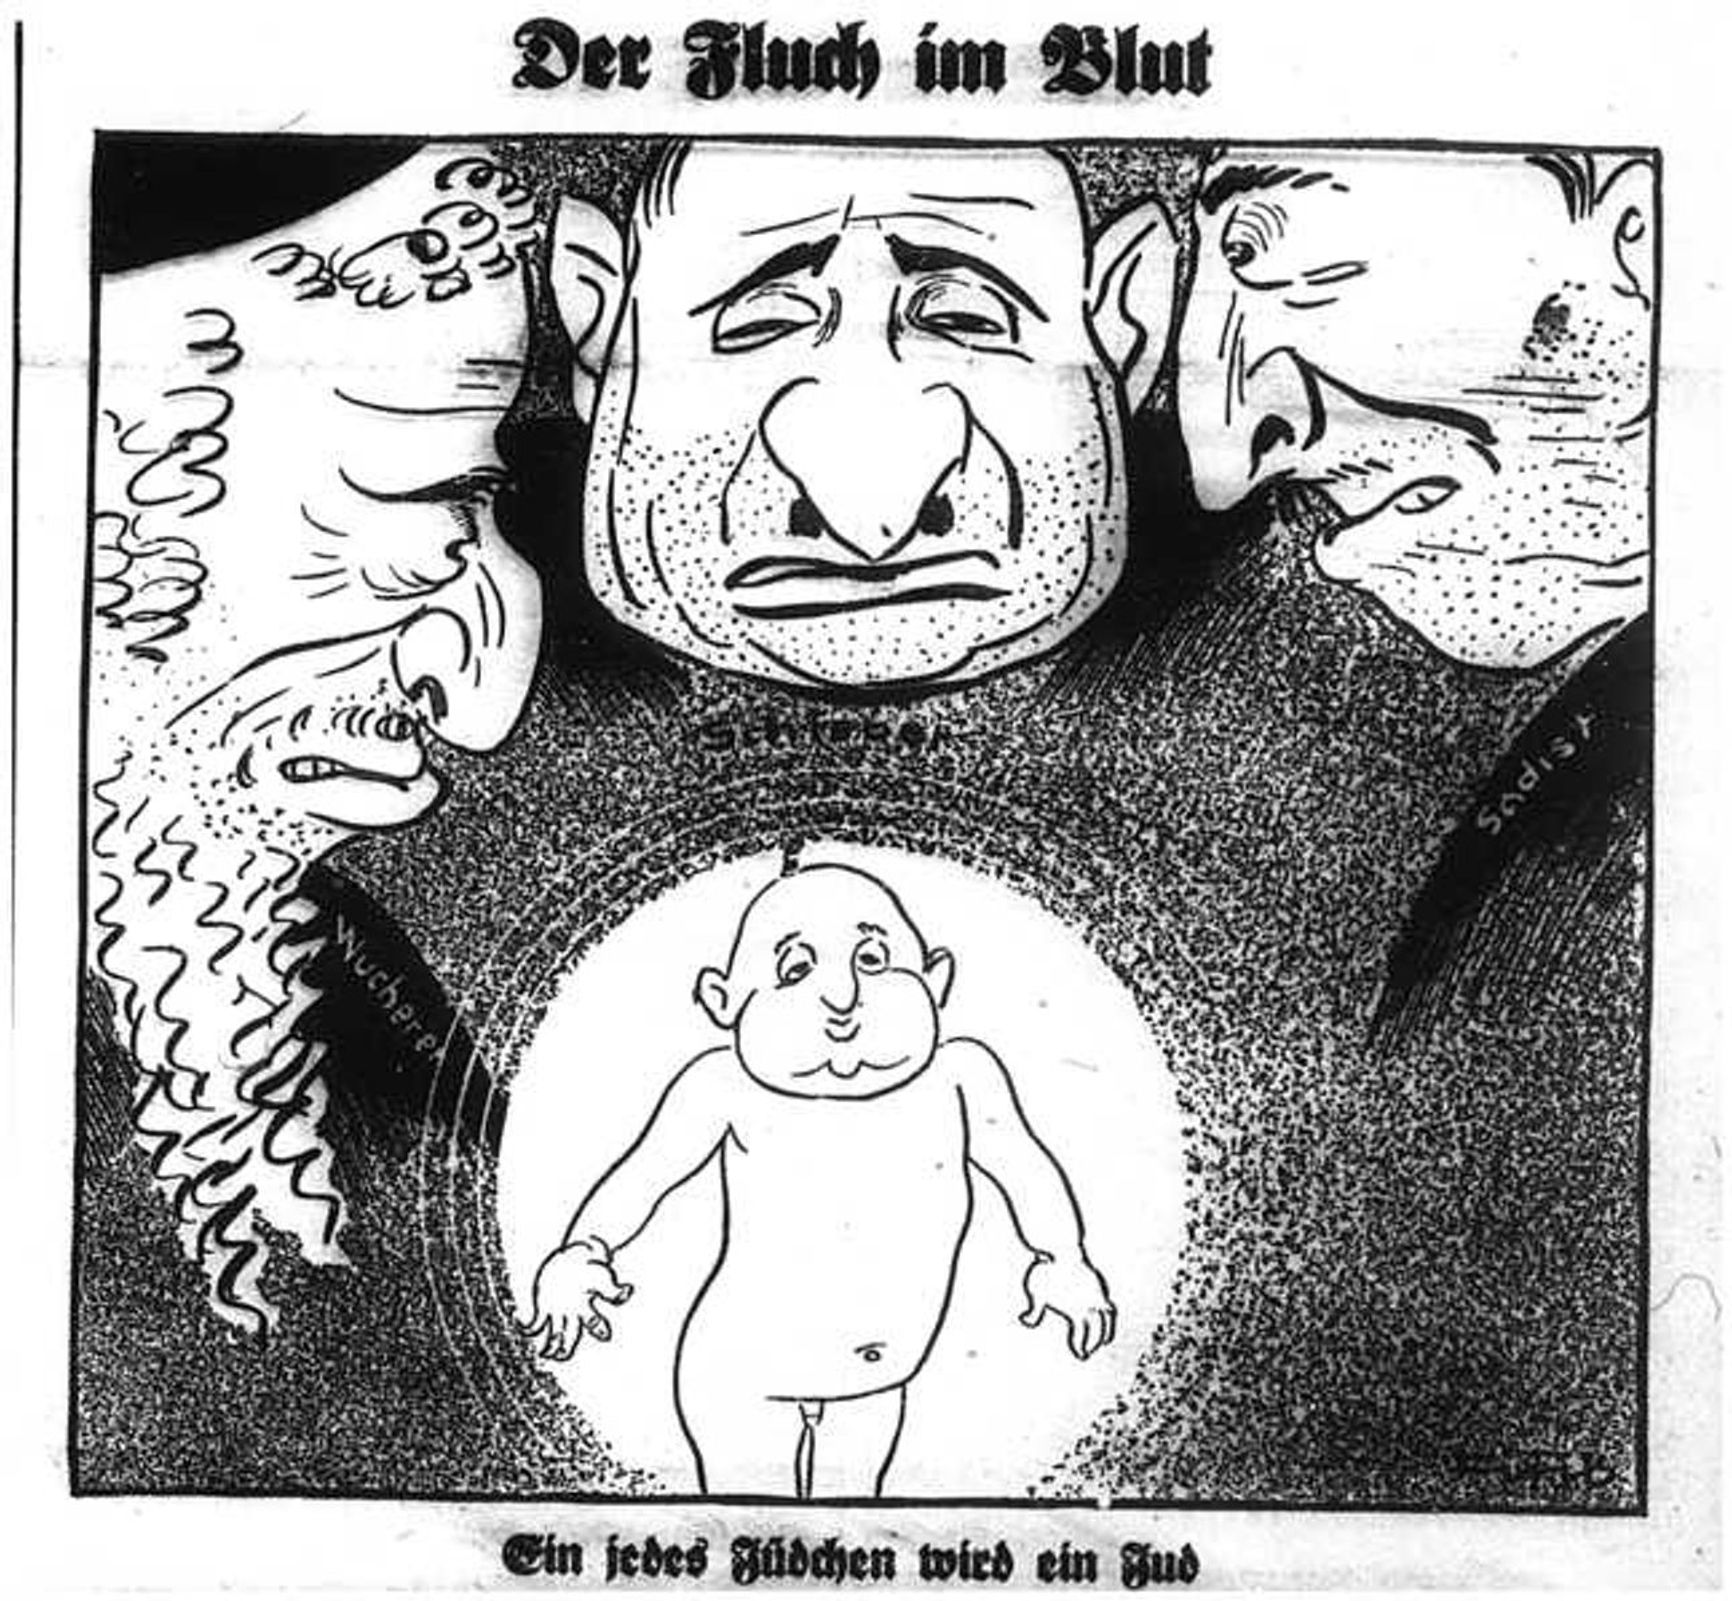 The caricature in Der Stürmer features a caption stating: “Every little Jewish child grows up to be a Jew”